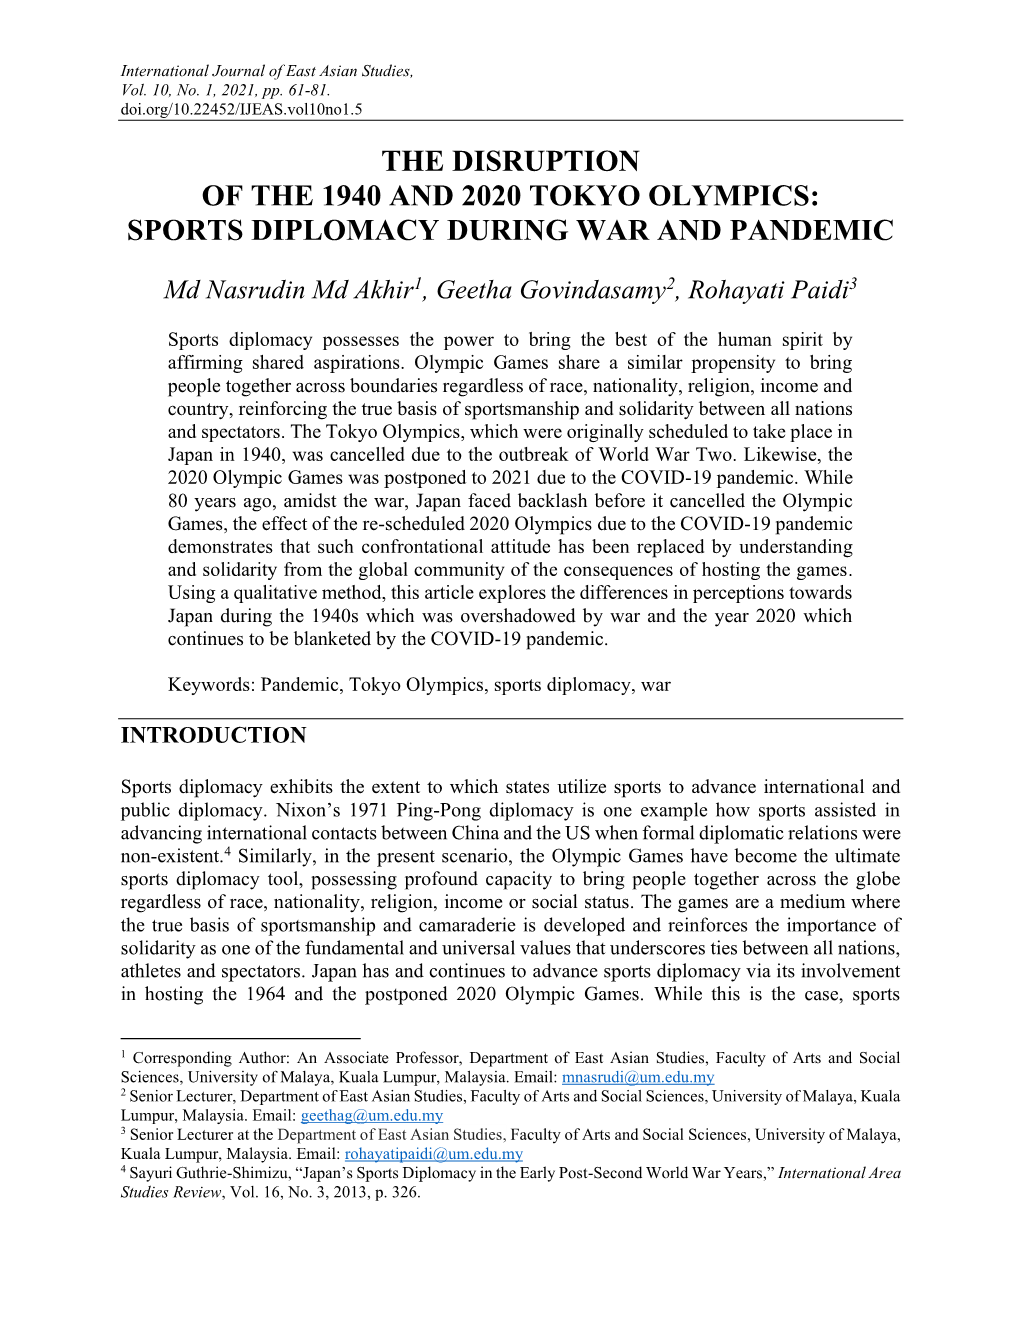 The Disruption of the 1940 and 2020 Tokyo Olympics: Sports Diplomacy During War and Pandemic